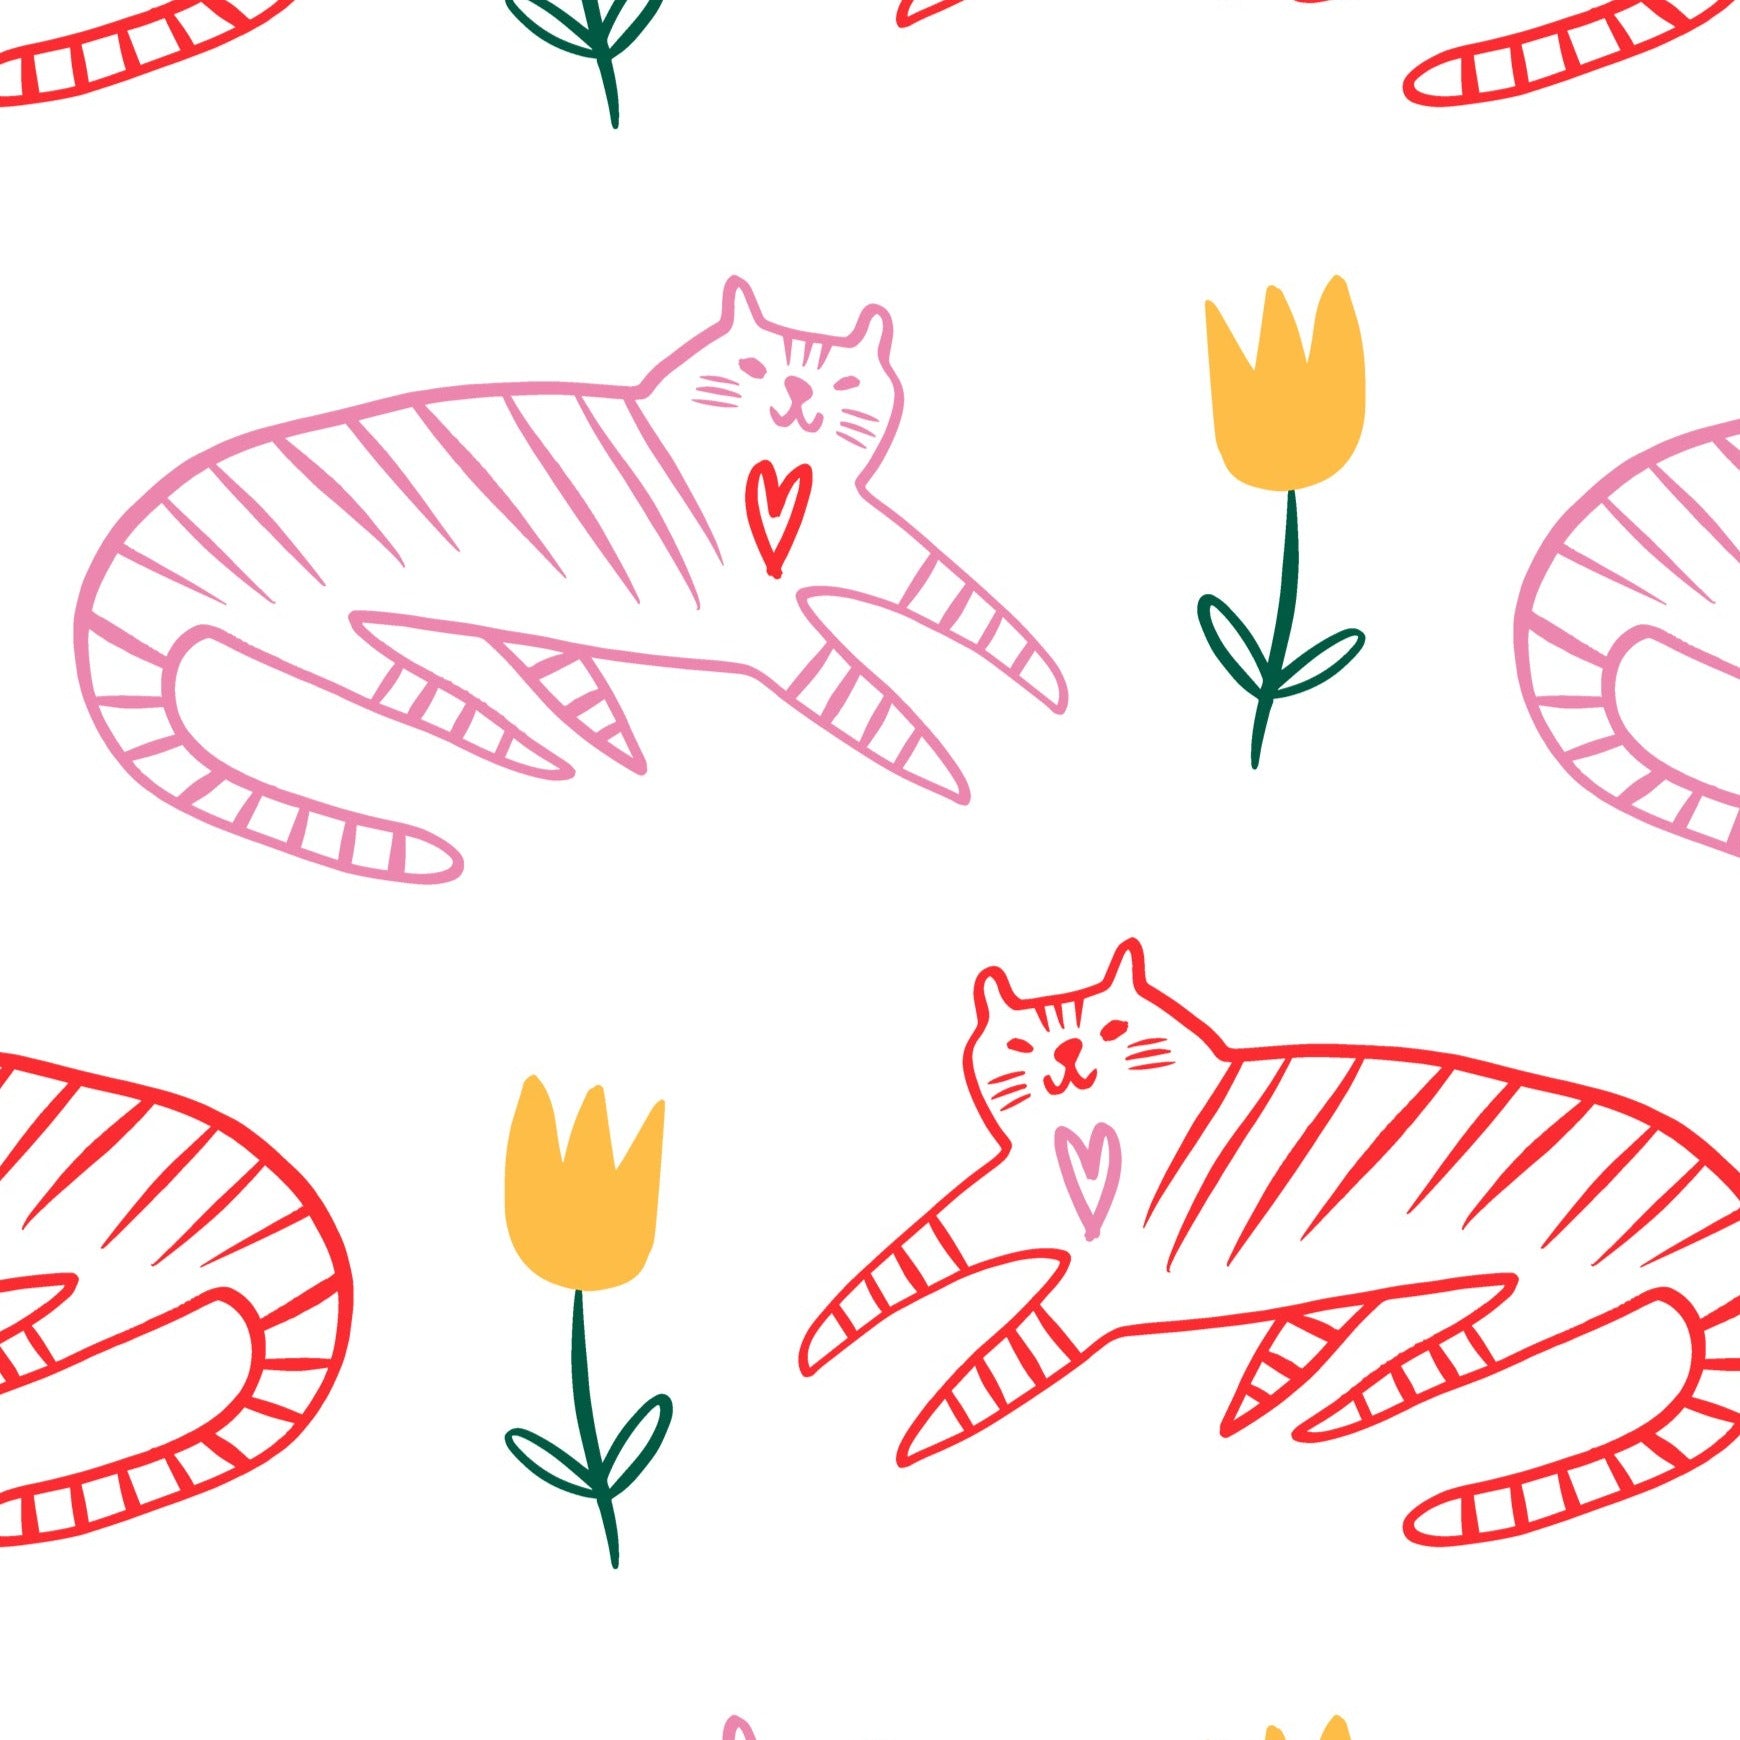 Charming wallpaper pattern from 'Cat Wallpaper 1' featuring red striped cats and green tulip motifs on a white background. The playful poses of the cats and the simple floral designs create a whimsical and engaging aesthetic, perfect for adding a vibrant touch to any room.